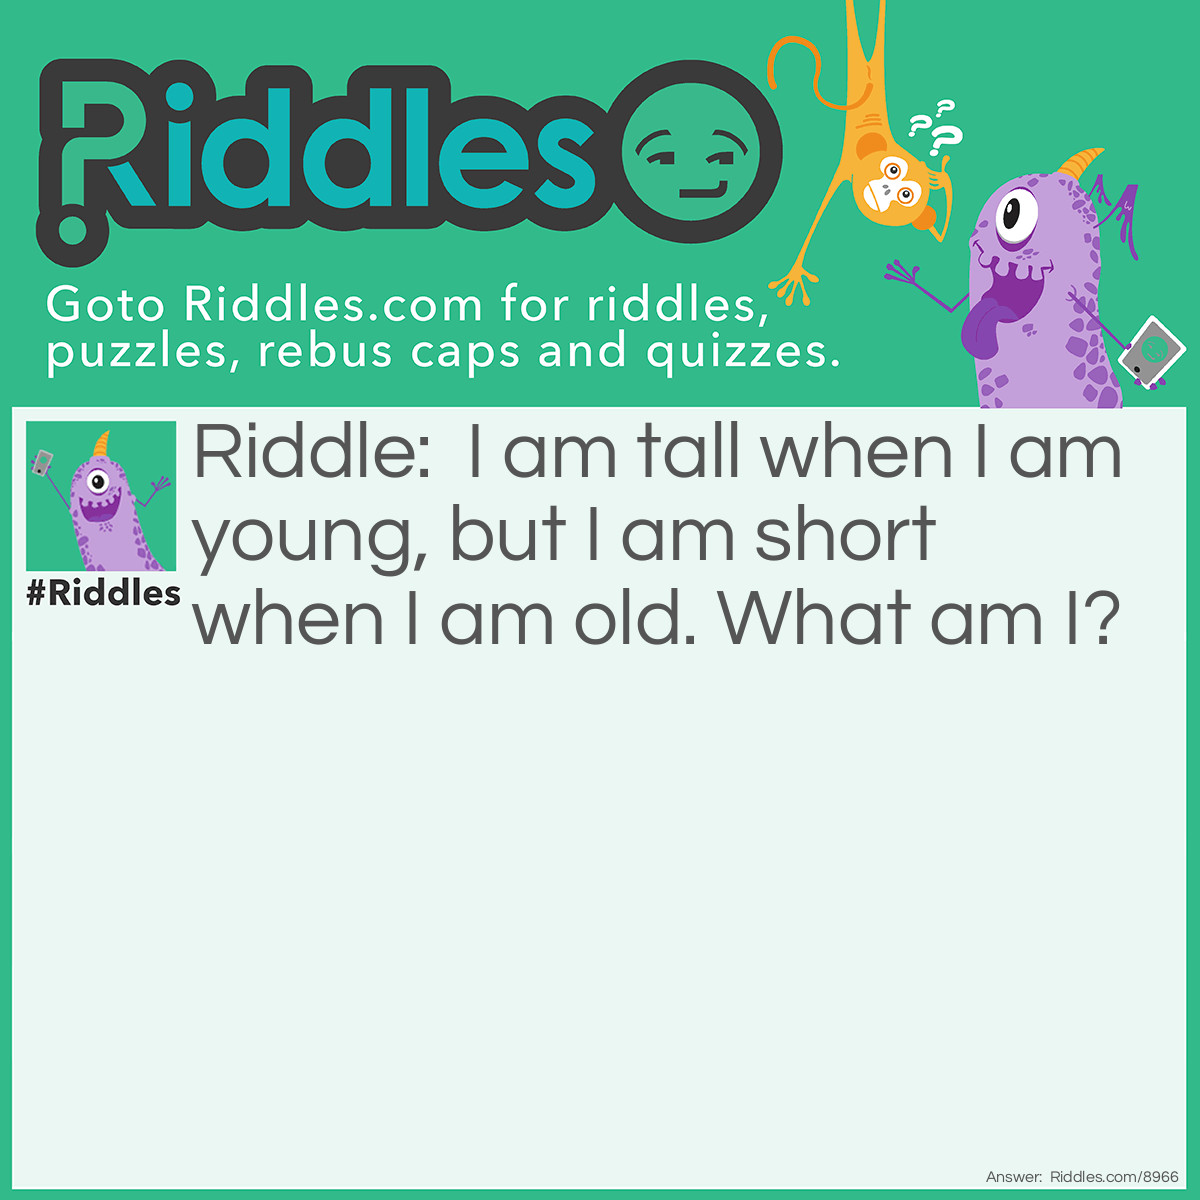 Riddle: I am tall when I am young, but I am short when I am old. What am I? Answer: A candle. Think: a candle is tall when it is new or young. Then, a candle is short when it starts to melt.